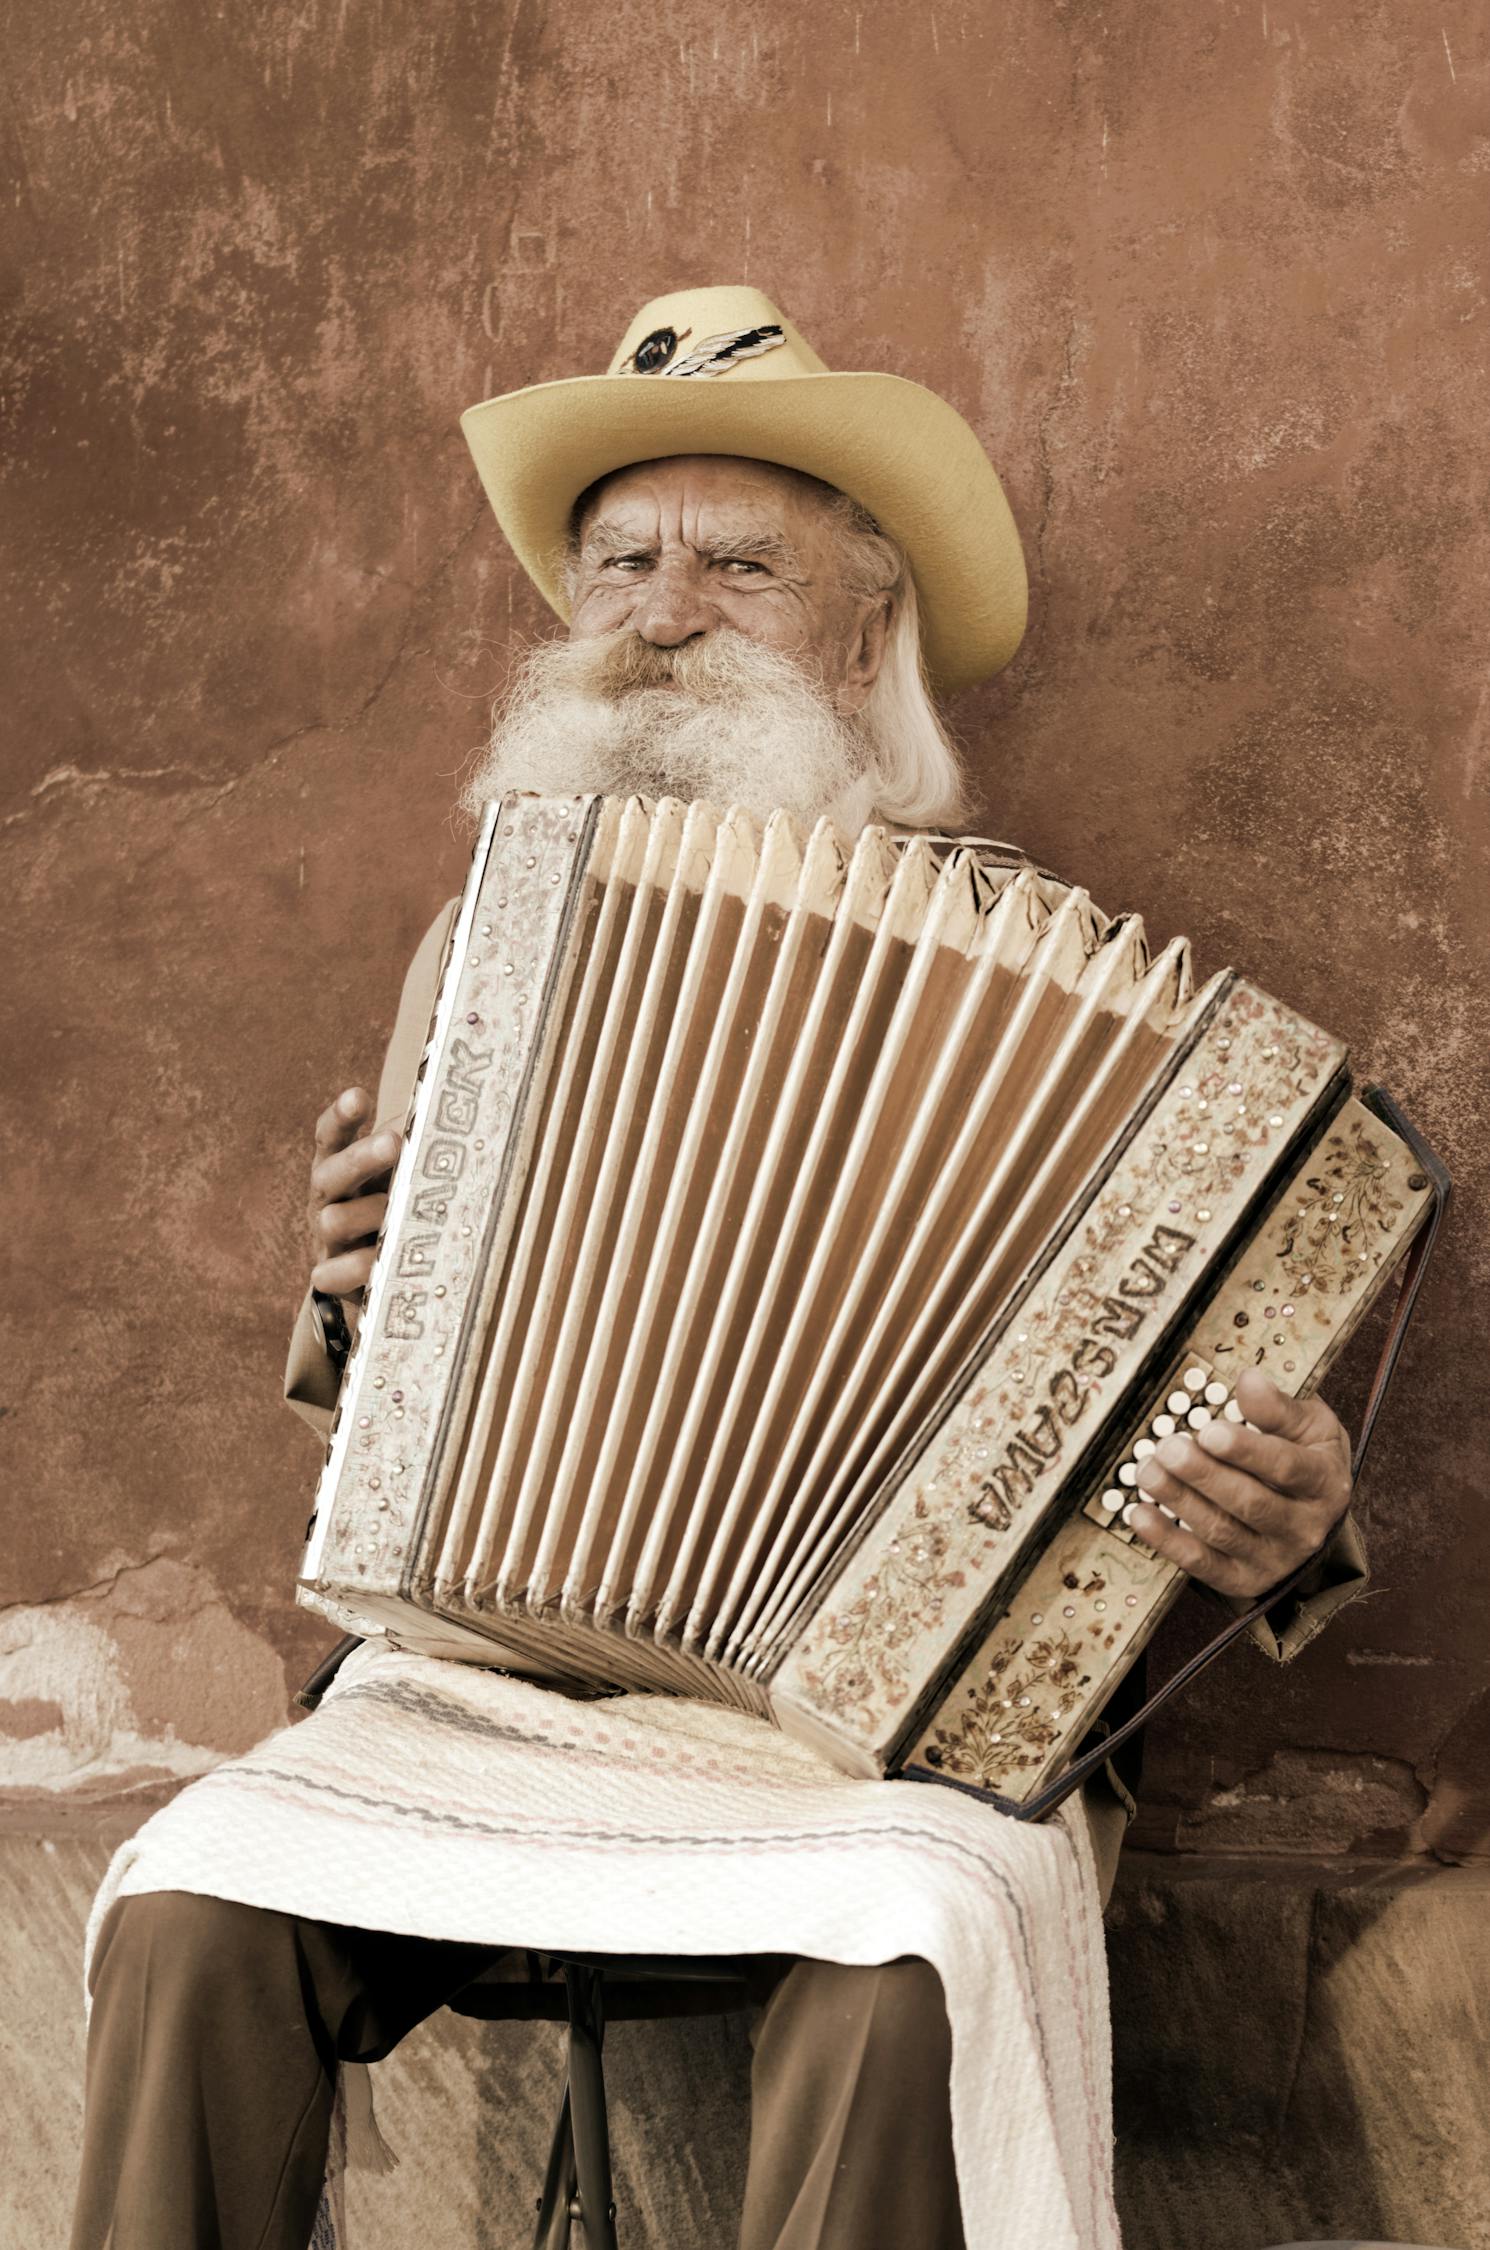 Adult Man Playing a Musial Instrument